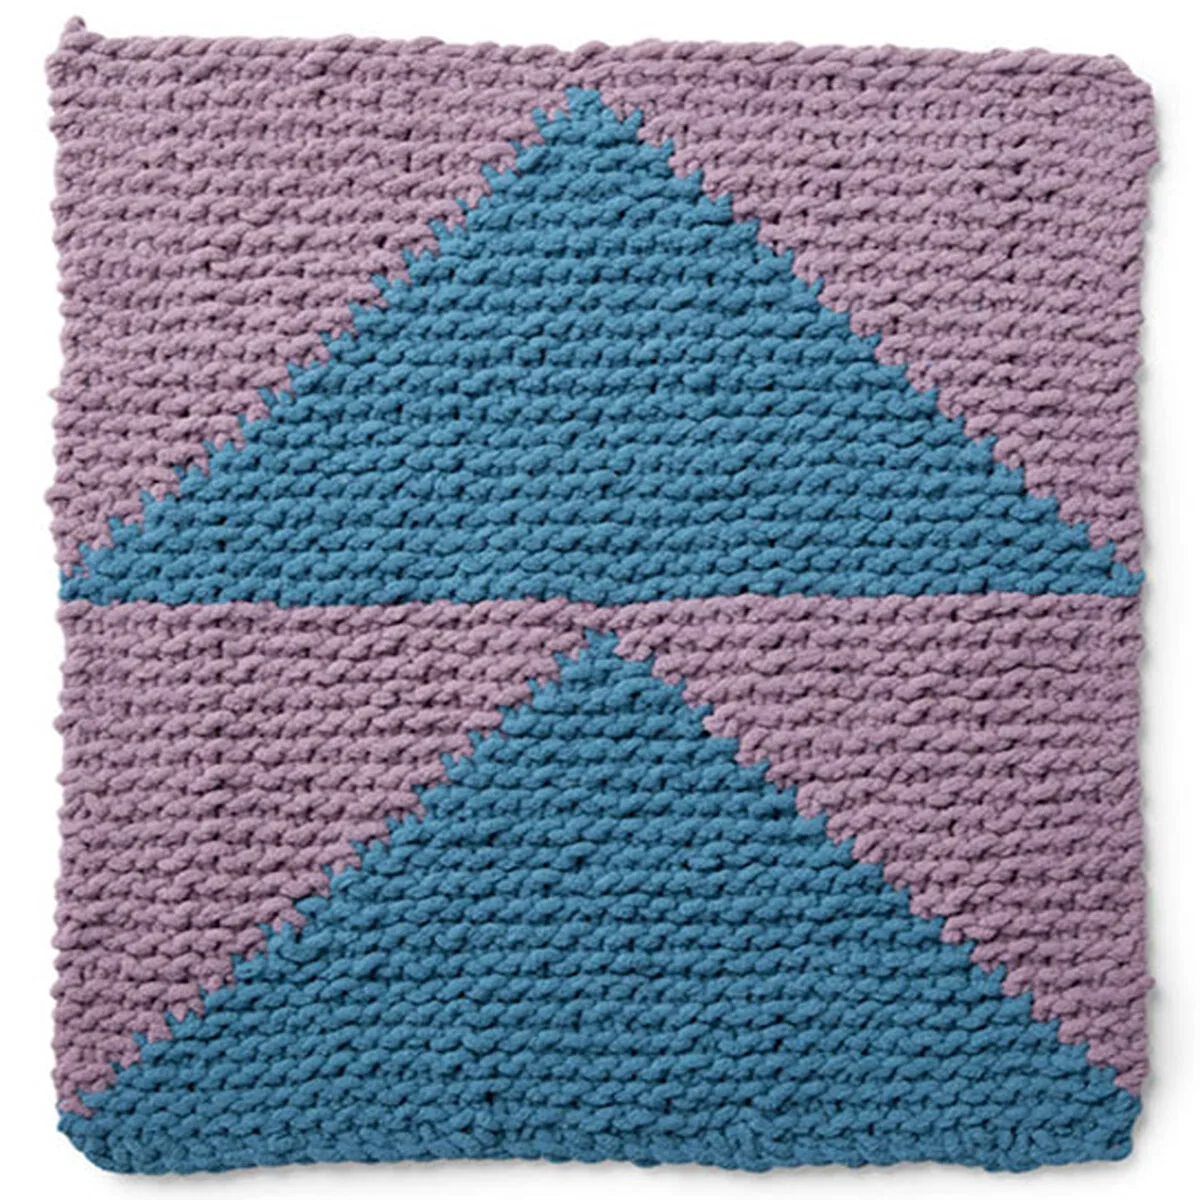 Knitted Square in the Flying Geese Design with shades of blue and purple yarn colors.